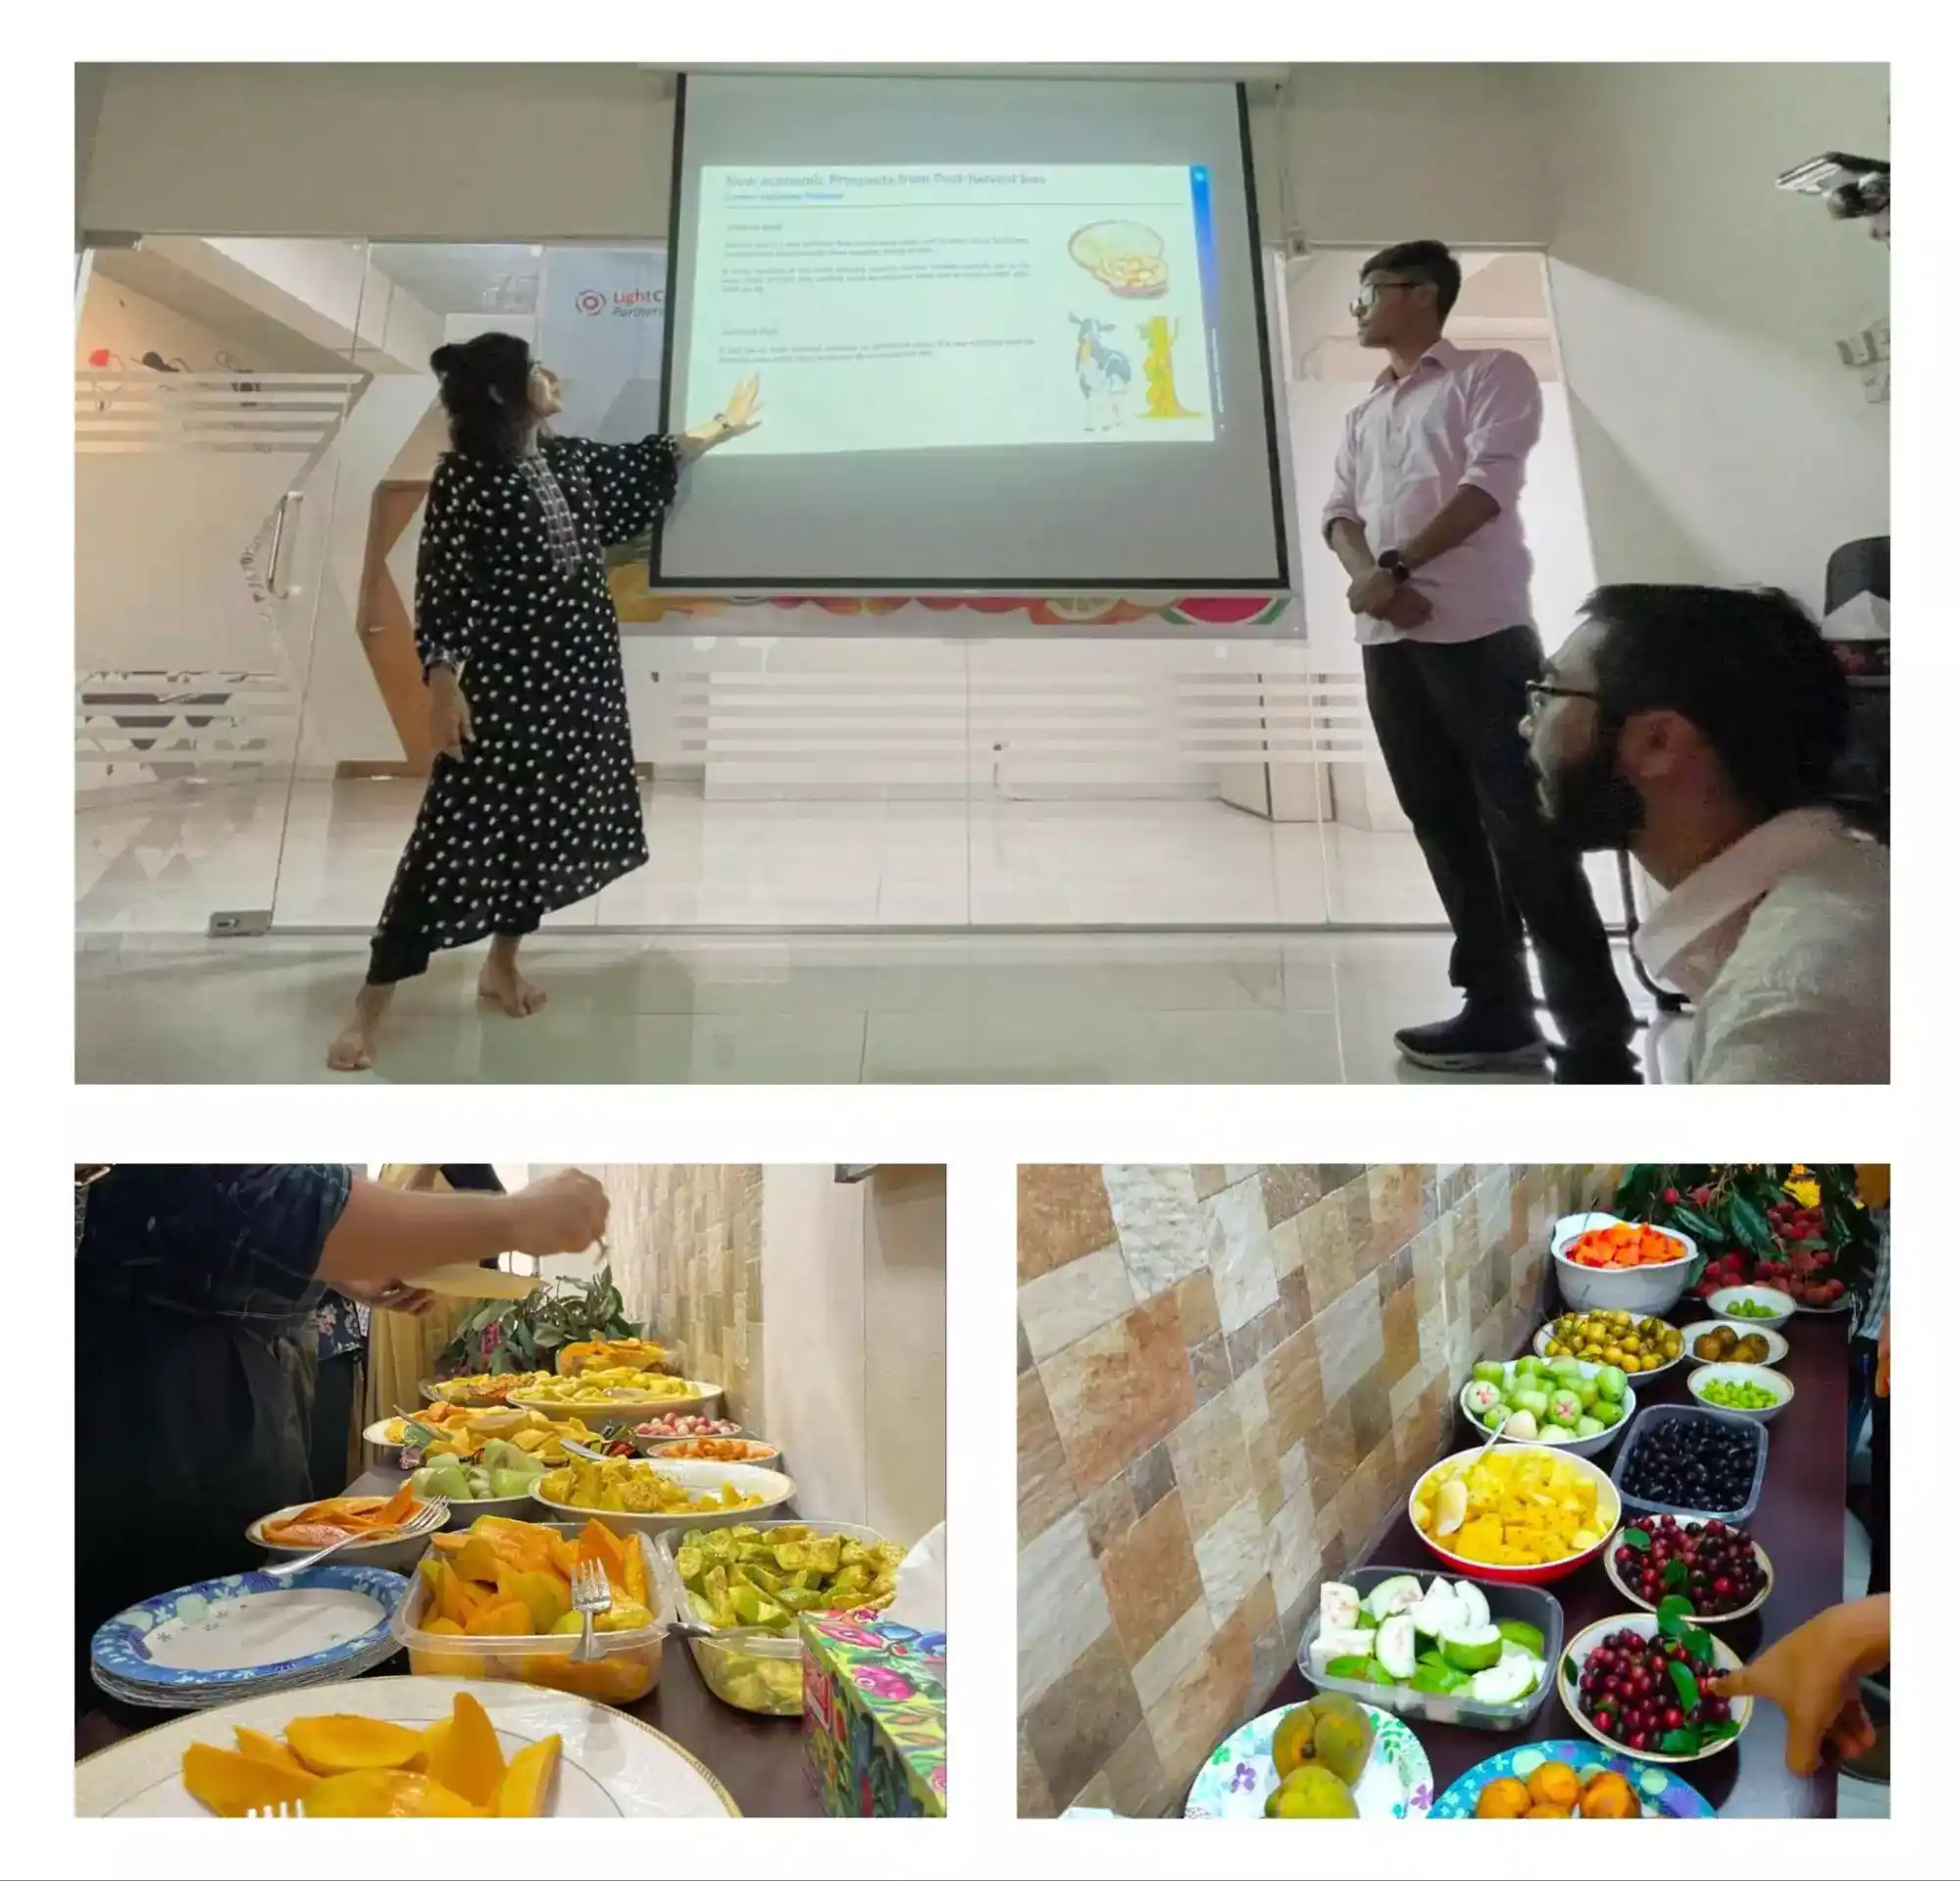 Samiha Anwar, Business Consultant, and Rakinul Islam, Business Analyst, from the Management and Development Consulting team prepared and delivered the presentation involving detailed value chain analyses of jackfruits and mangoes in Bangladesh